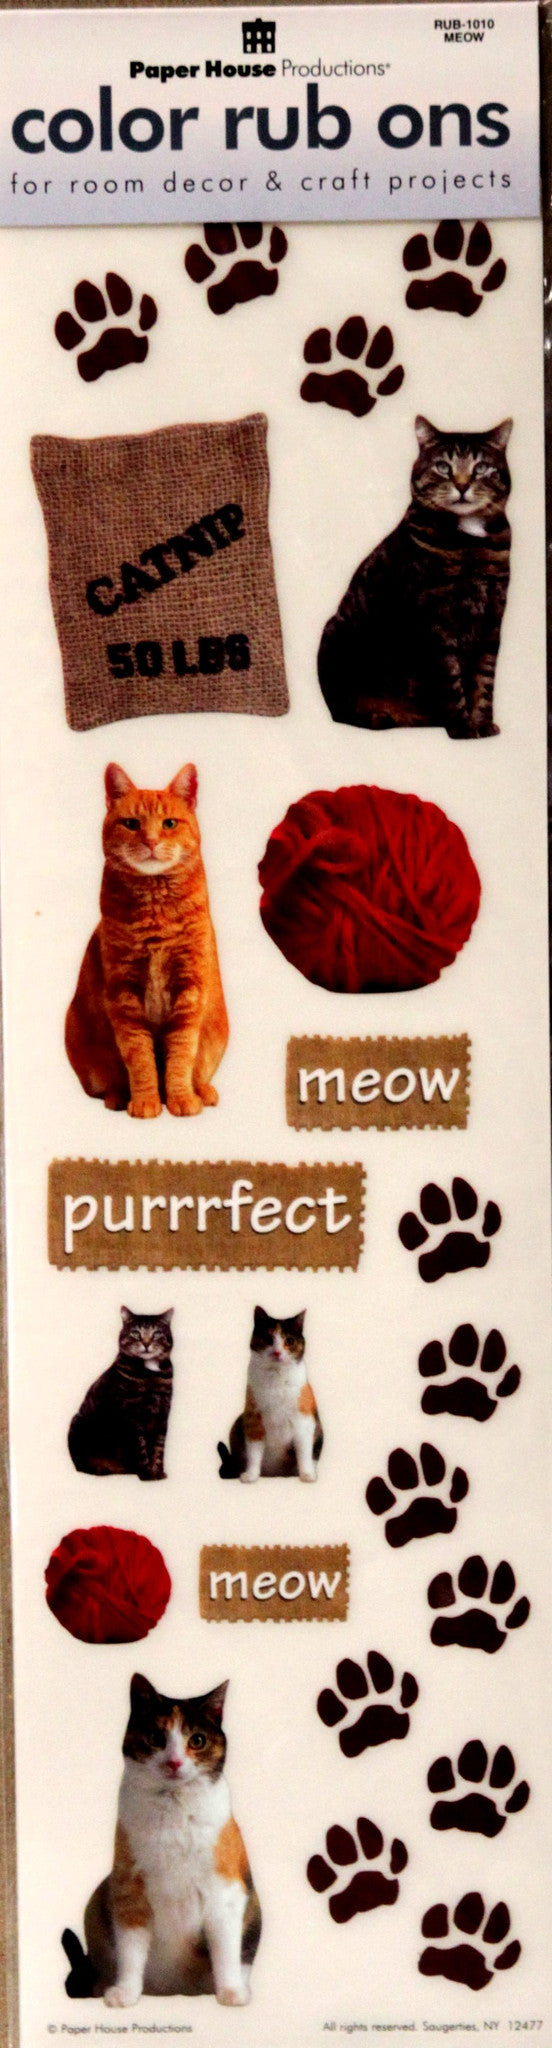 Paper House Productions Meow Color Rub-ons Embellishments - SCRAPBOOKFARE